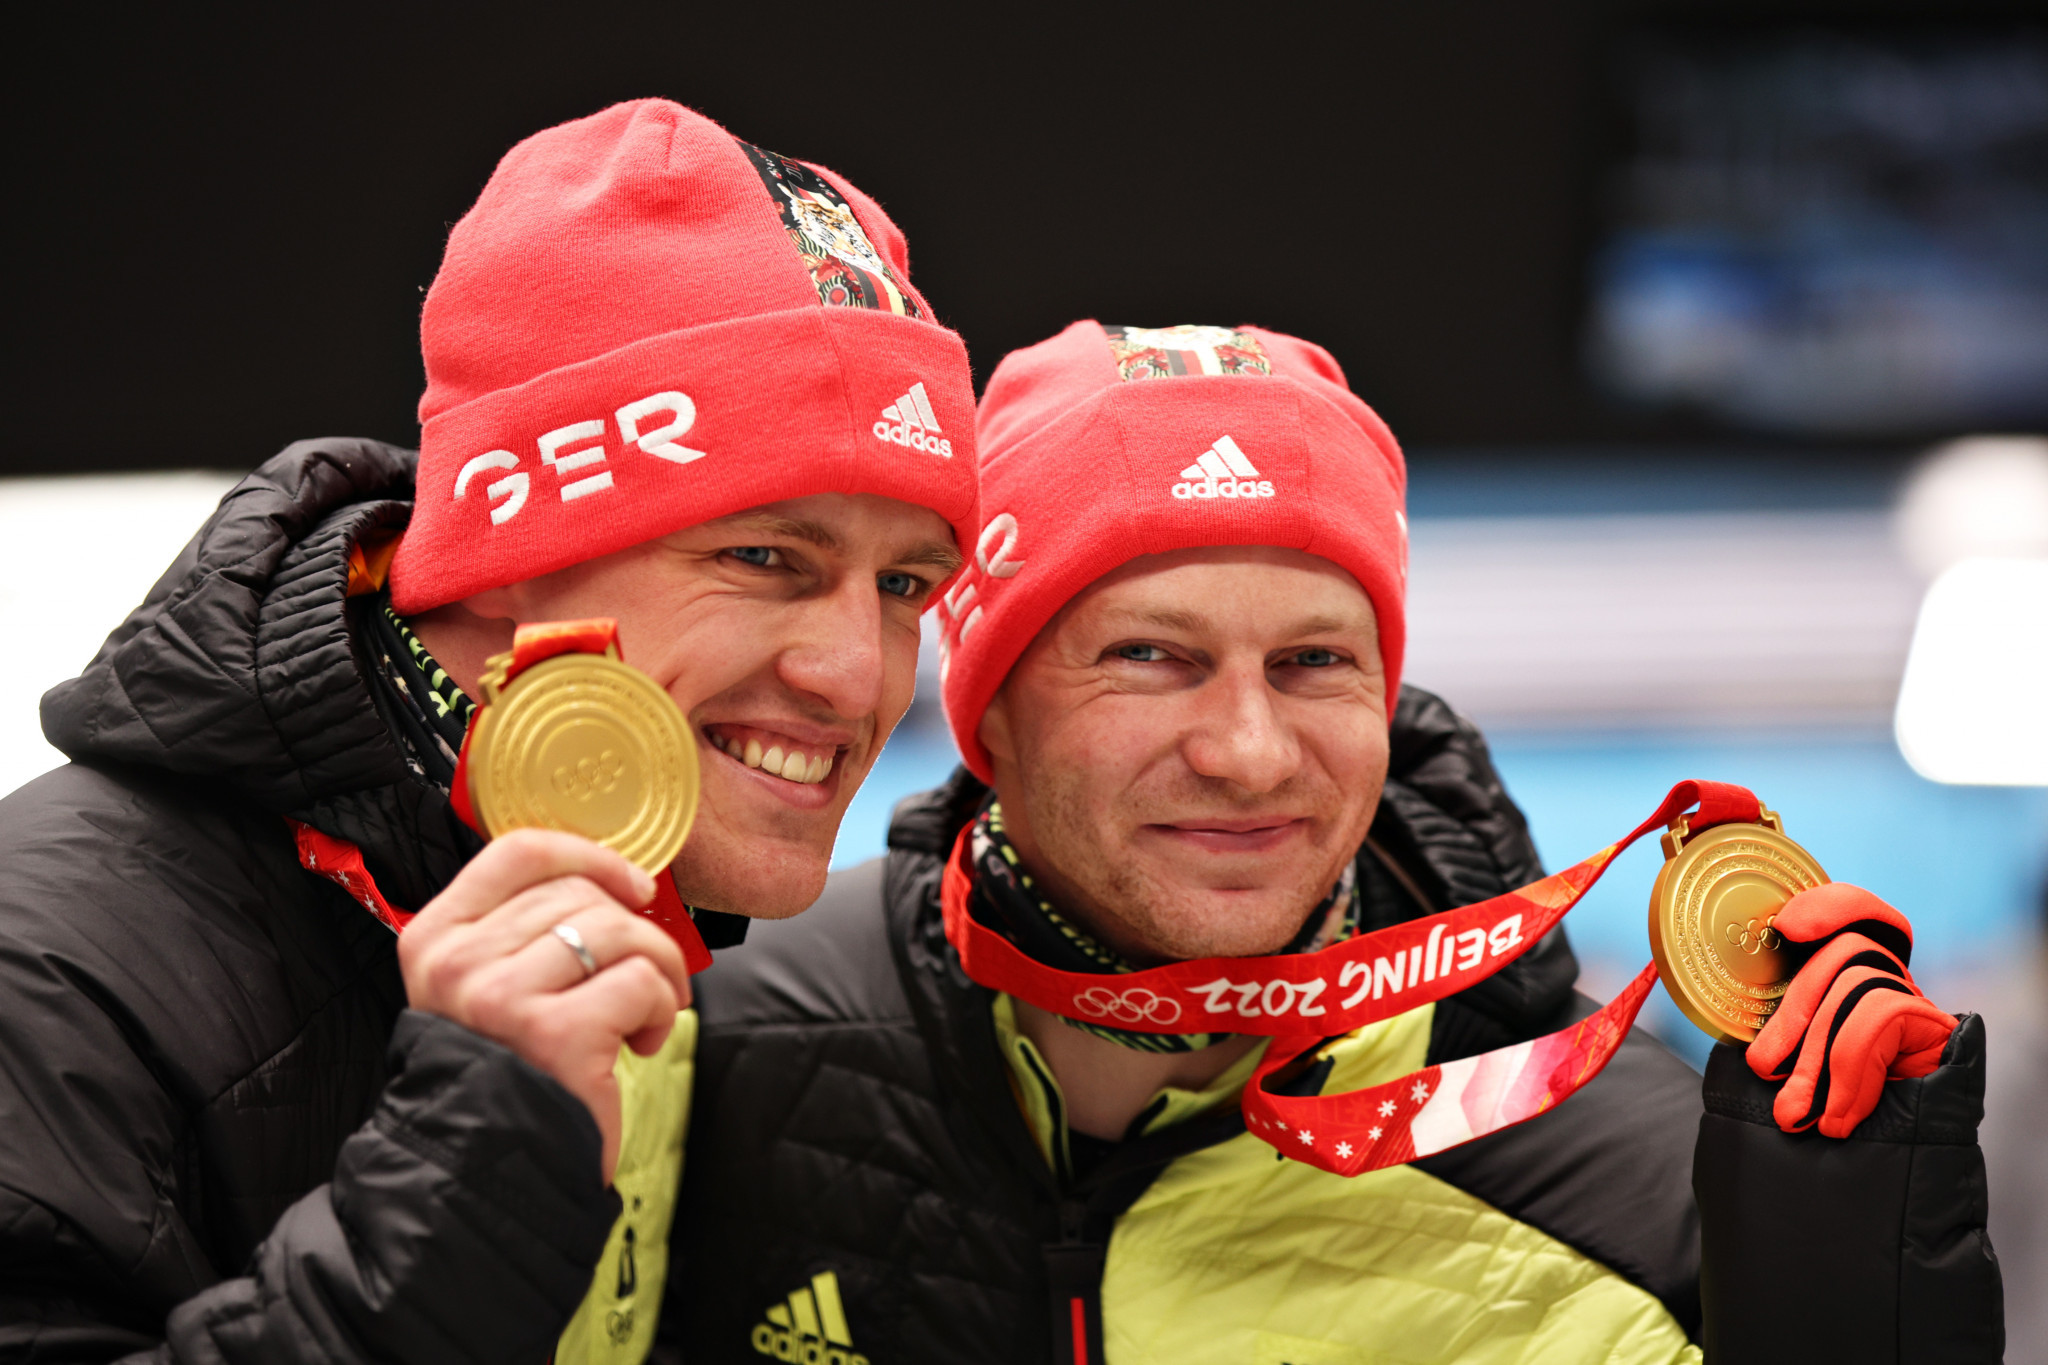 Francesco Friedrich and Thorsten Margis won two man bob gold for the second Olympics in a row Ⓒ Getty Images